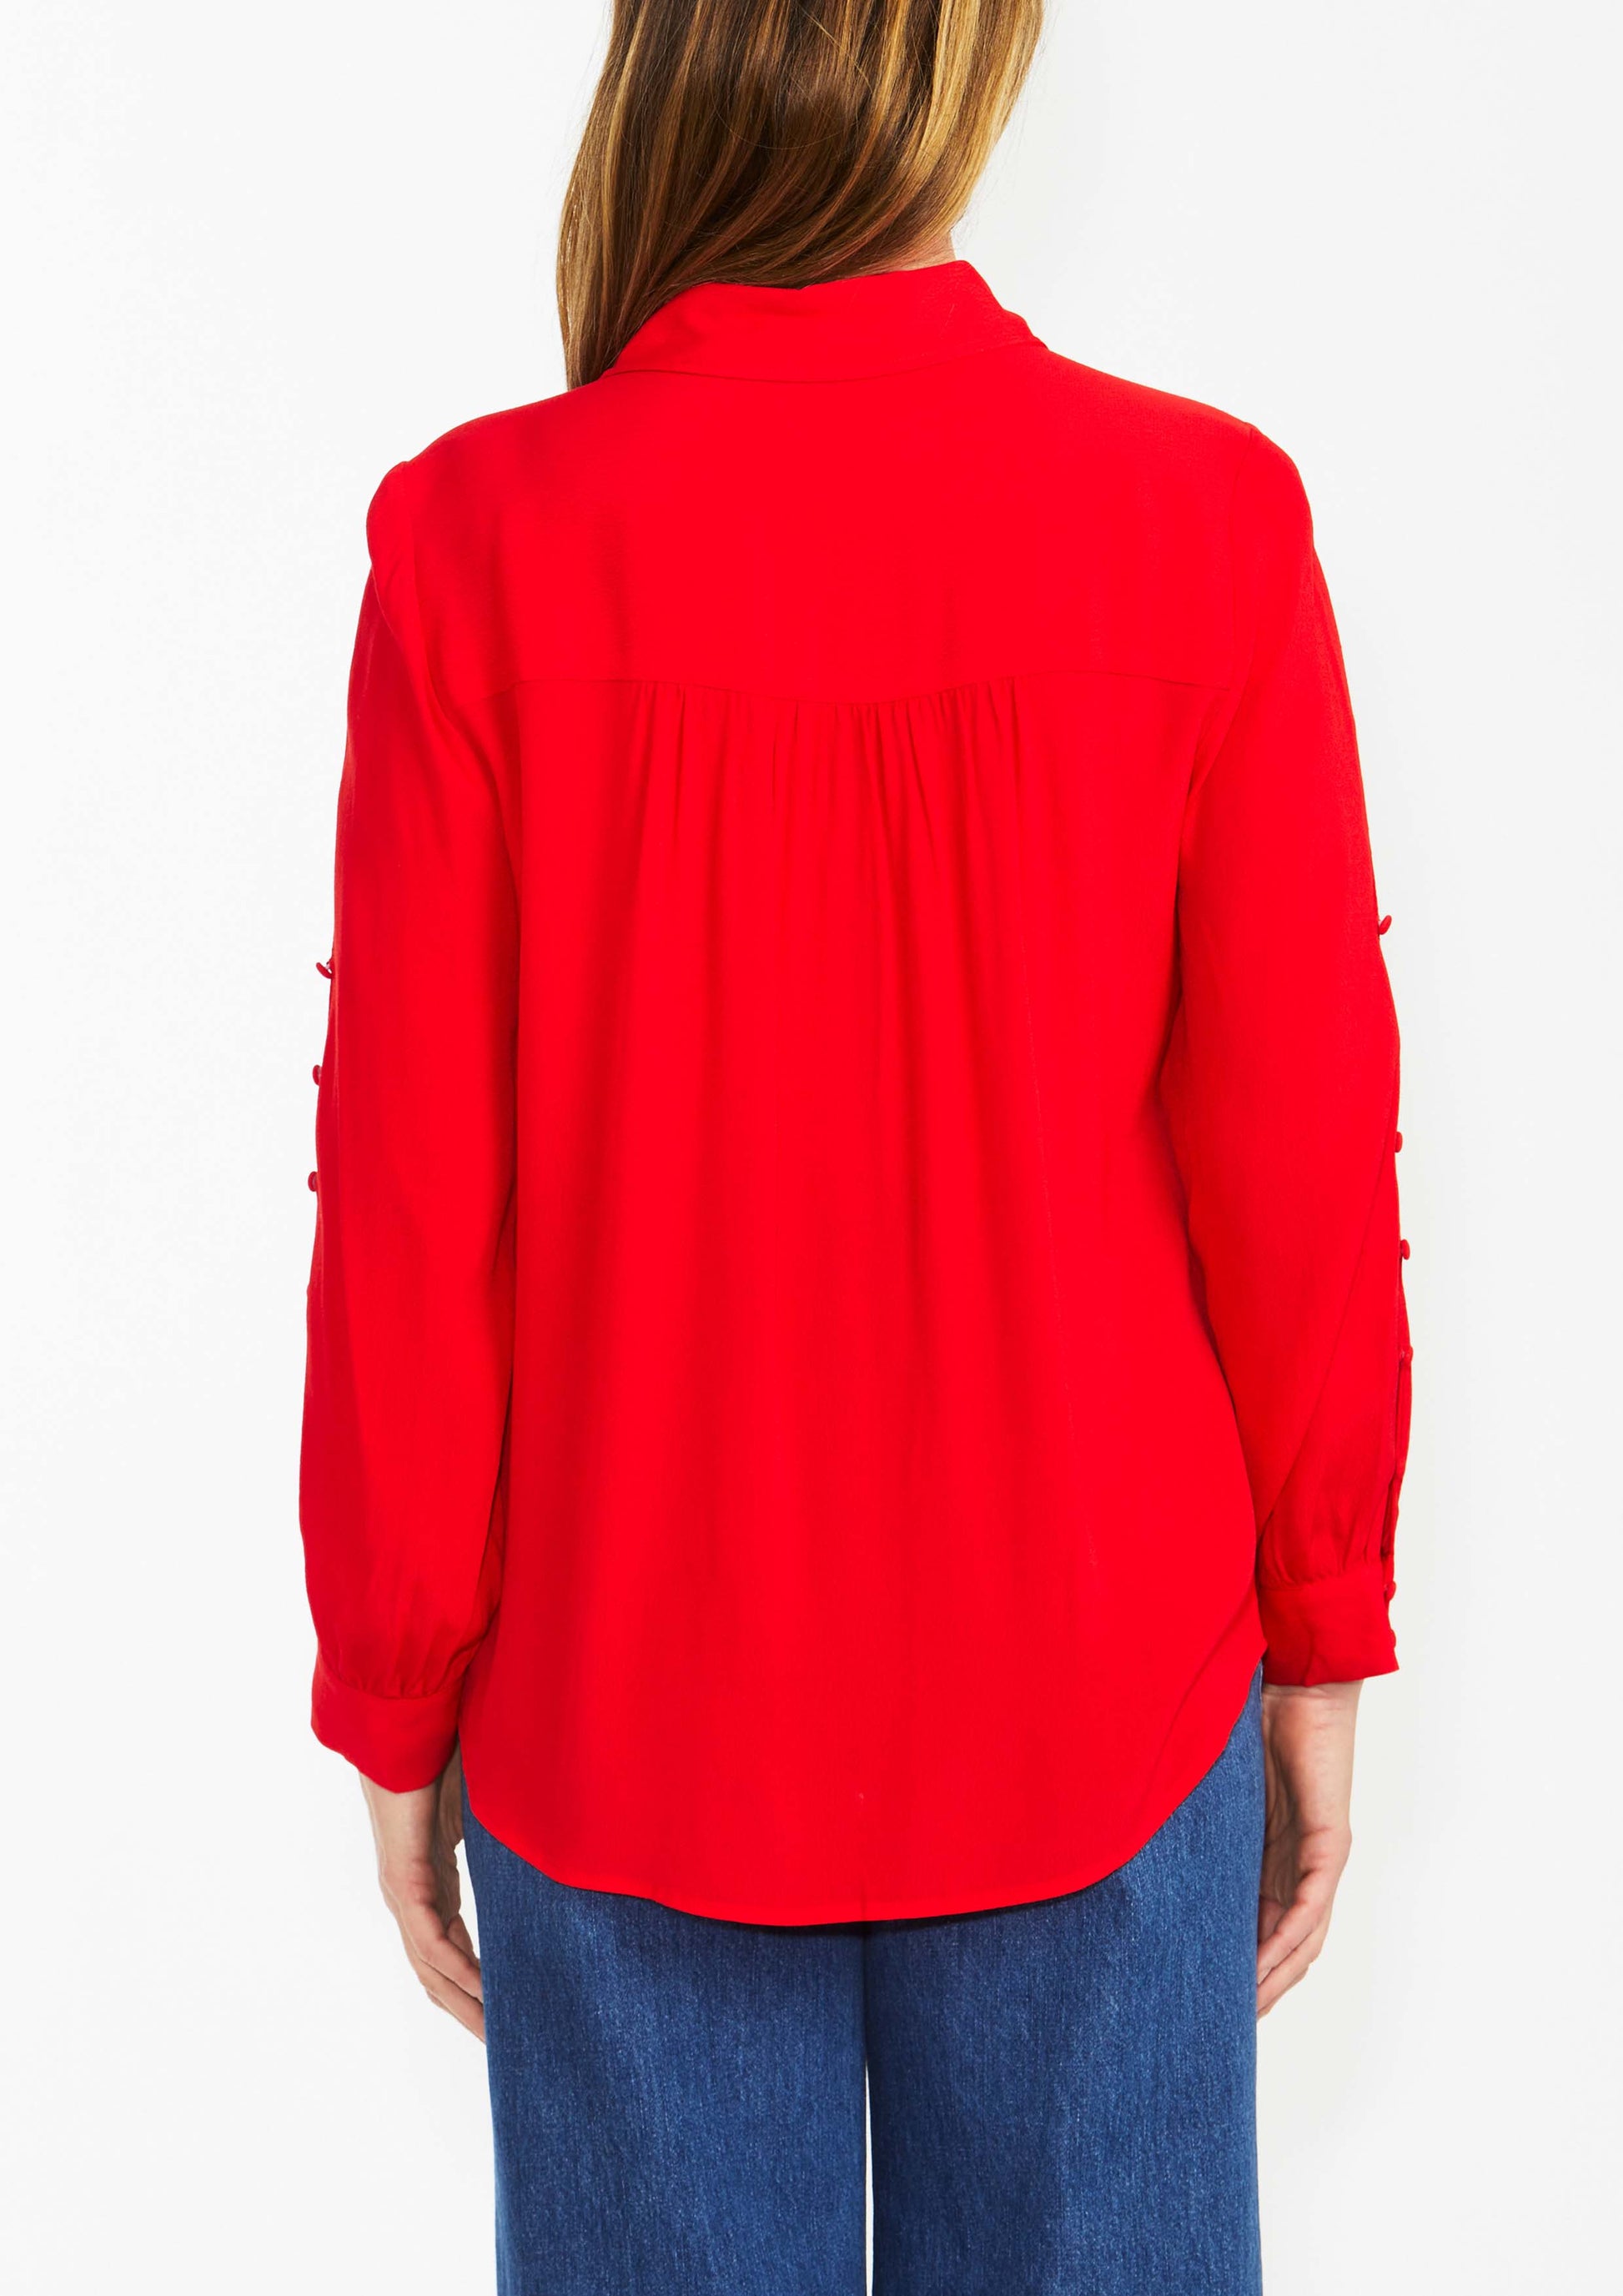 Ping Pong Button Sleeve Shirt - Red 